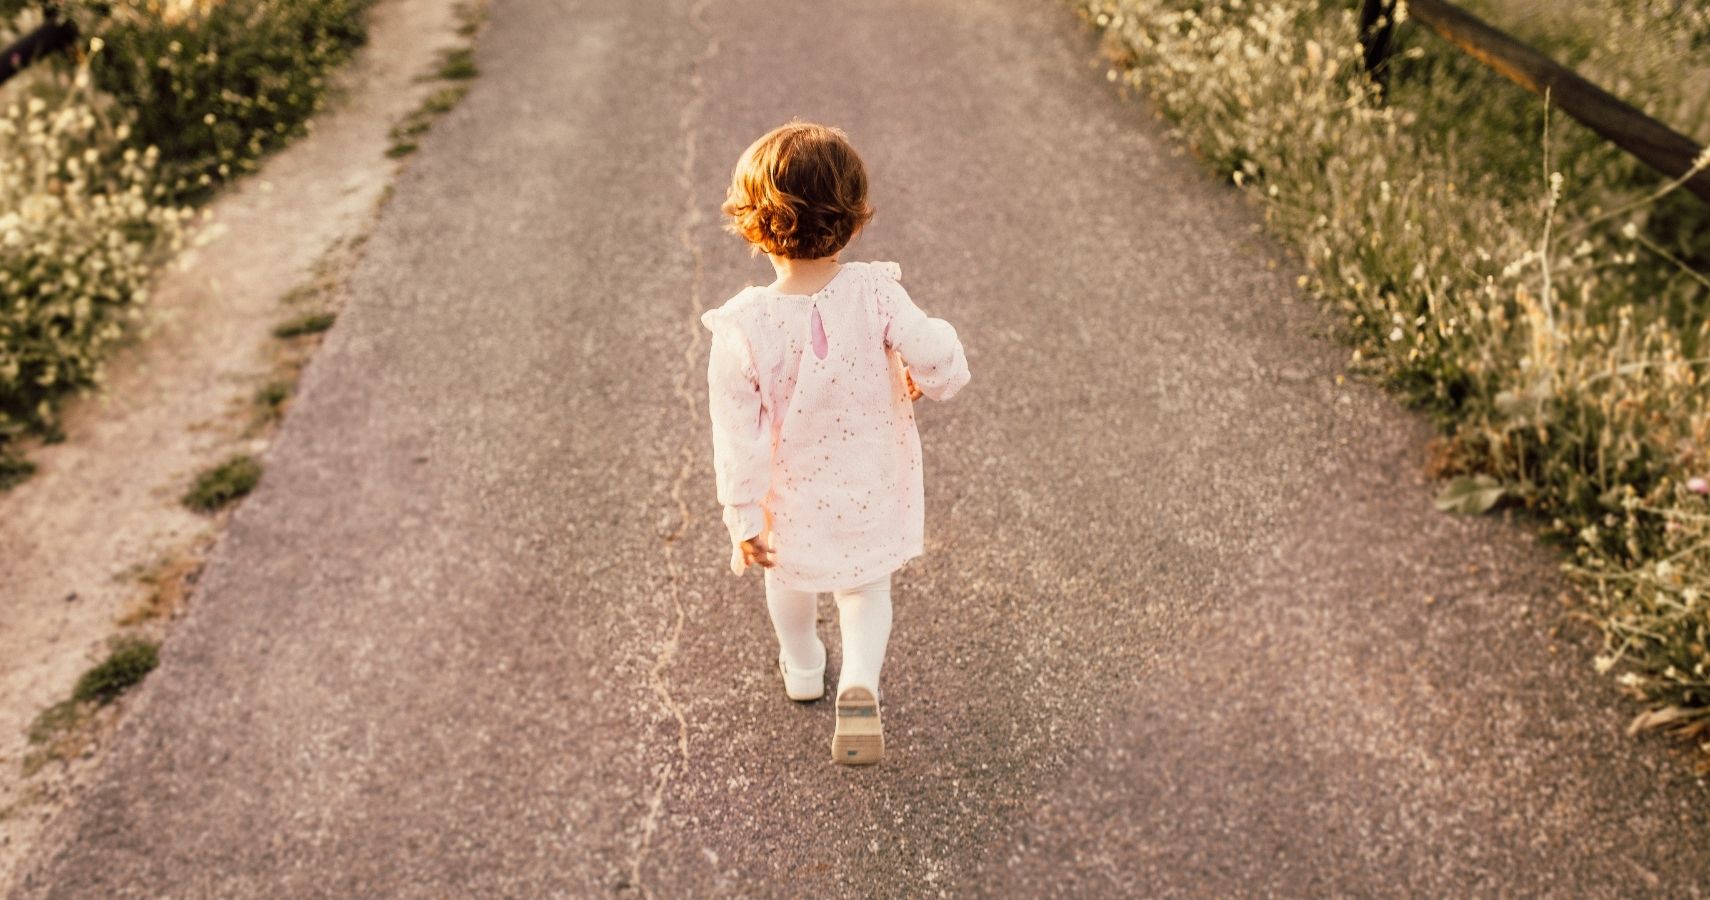 Toddler girl walking on paved road by herself